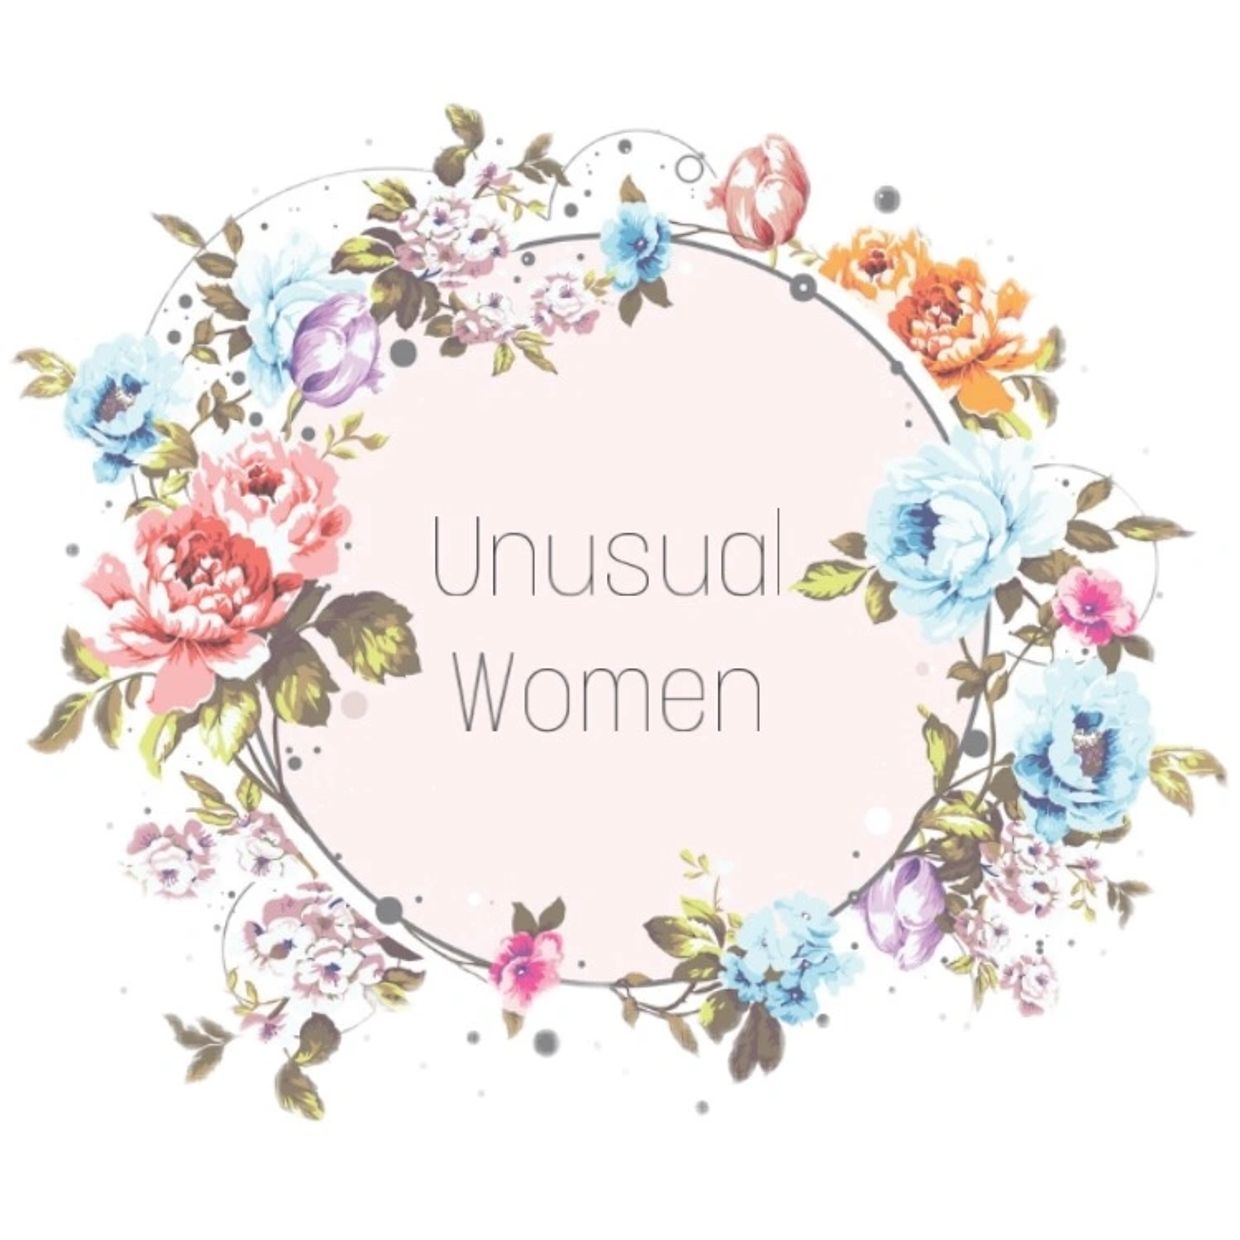 A wreath of flowers in shades of blue, pink and orange In the center is text: Unusual Women